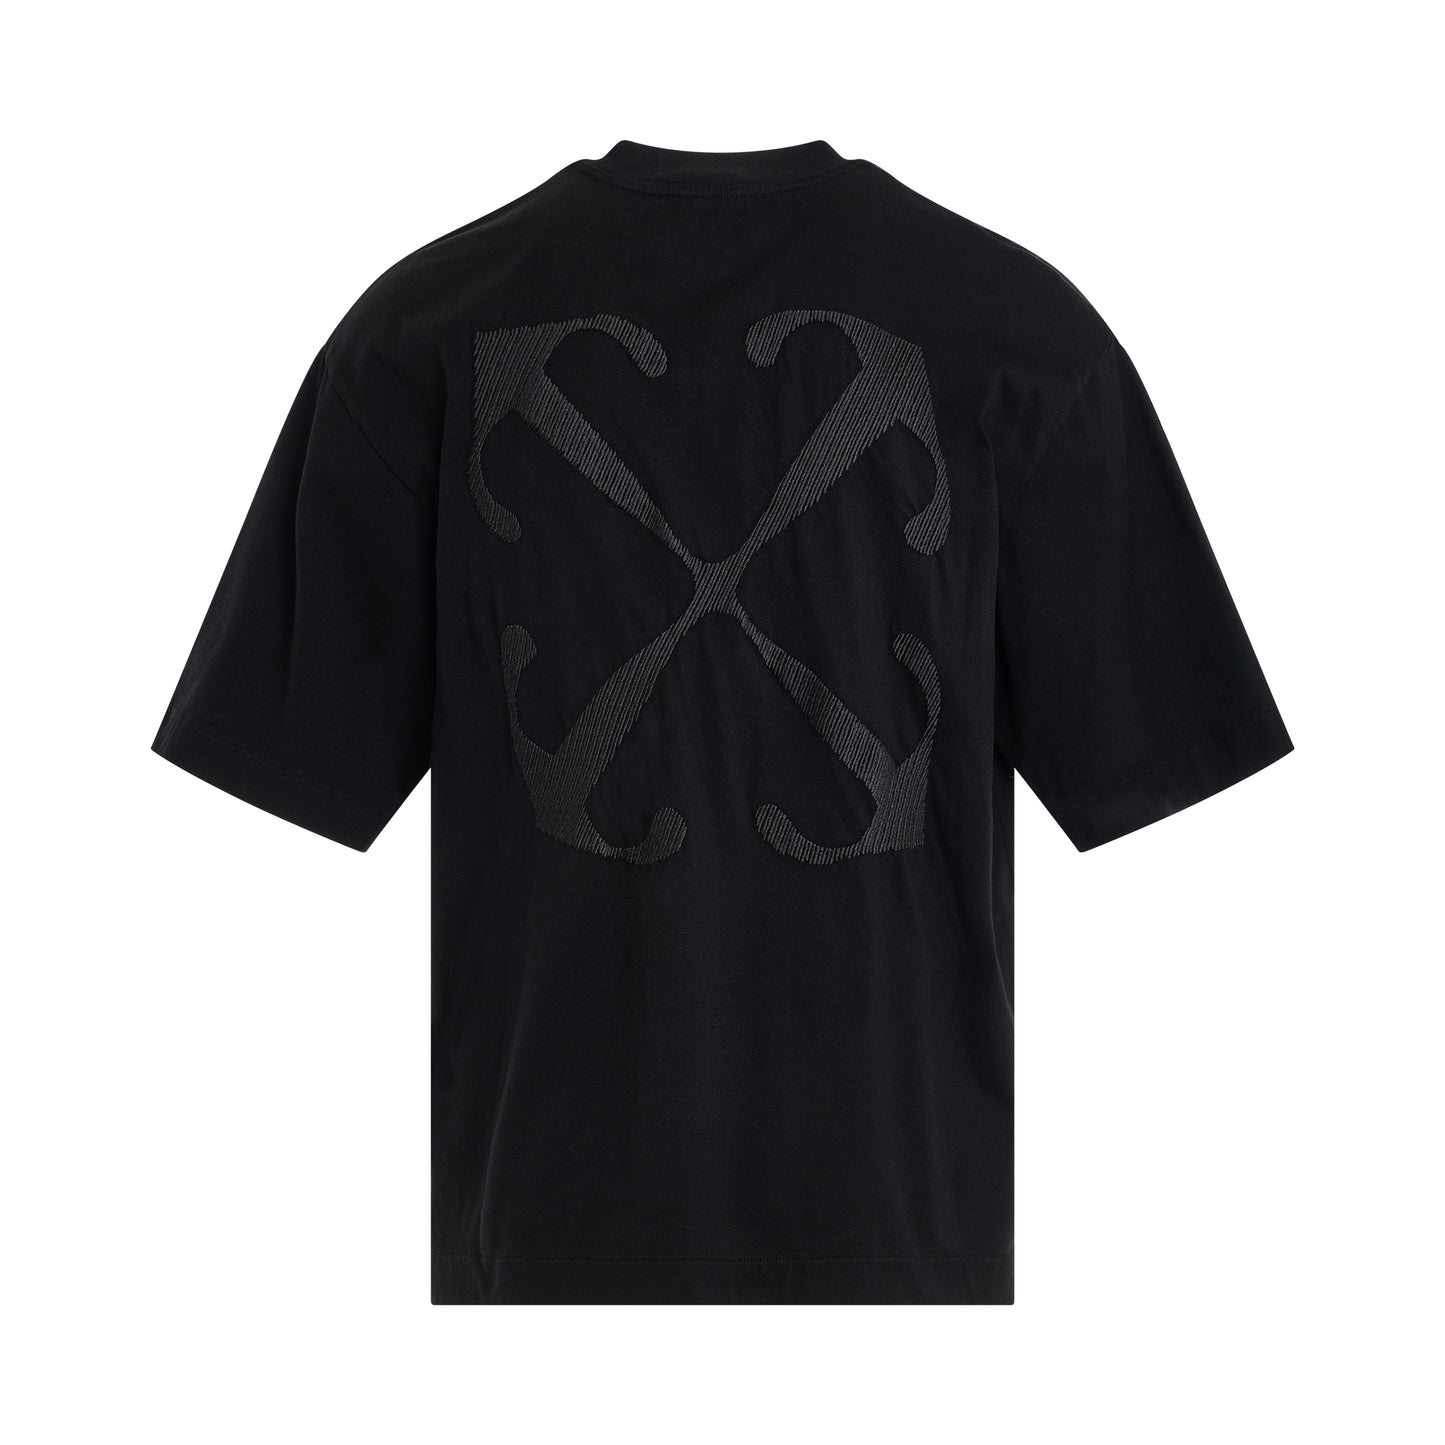 Arrow Embroidered Skate T-Shirt in Black/White